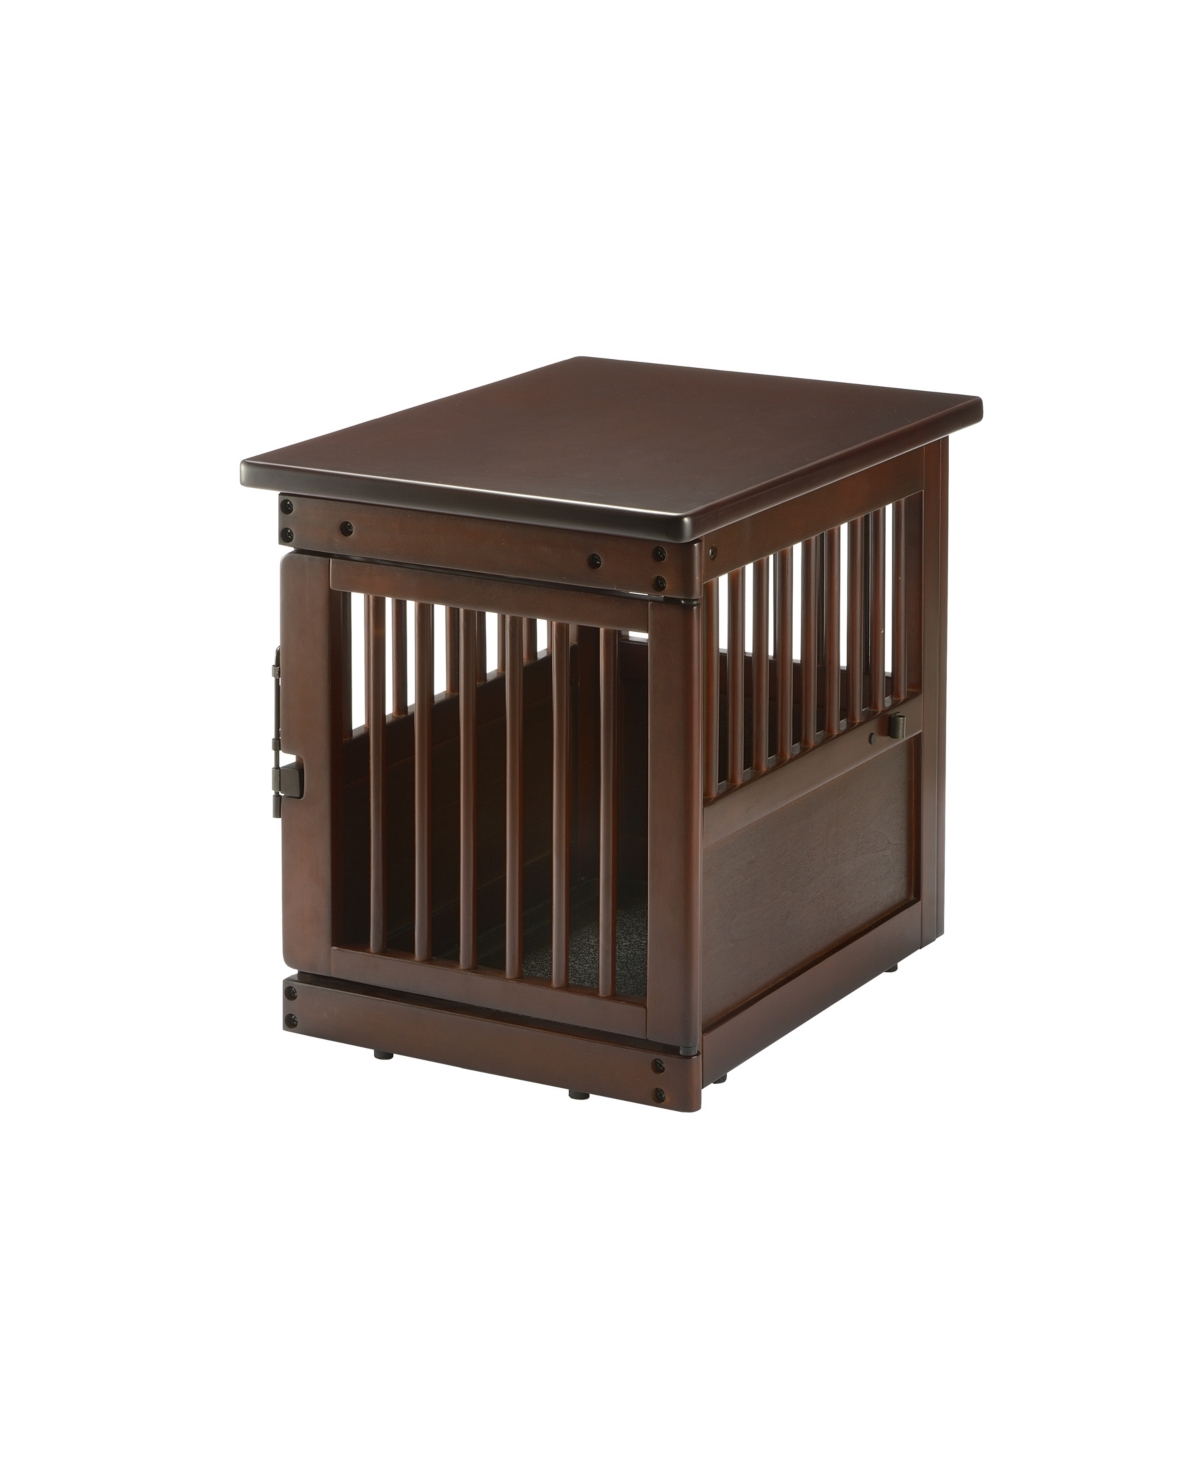 Wooden End Table Crate - Small - Dark Brown